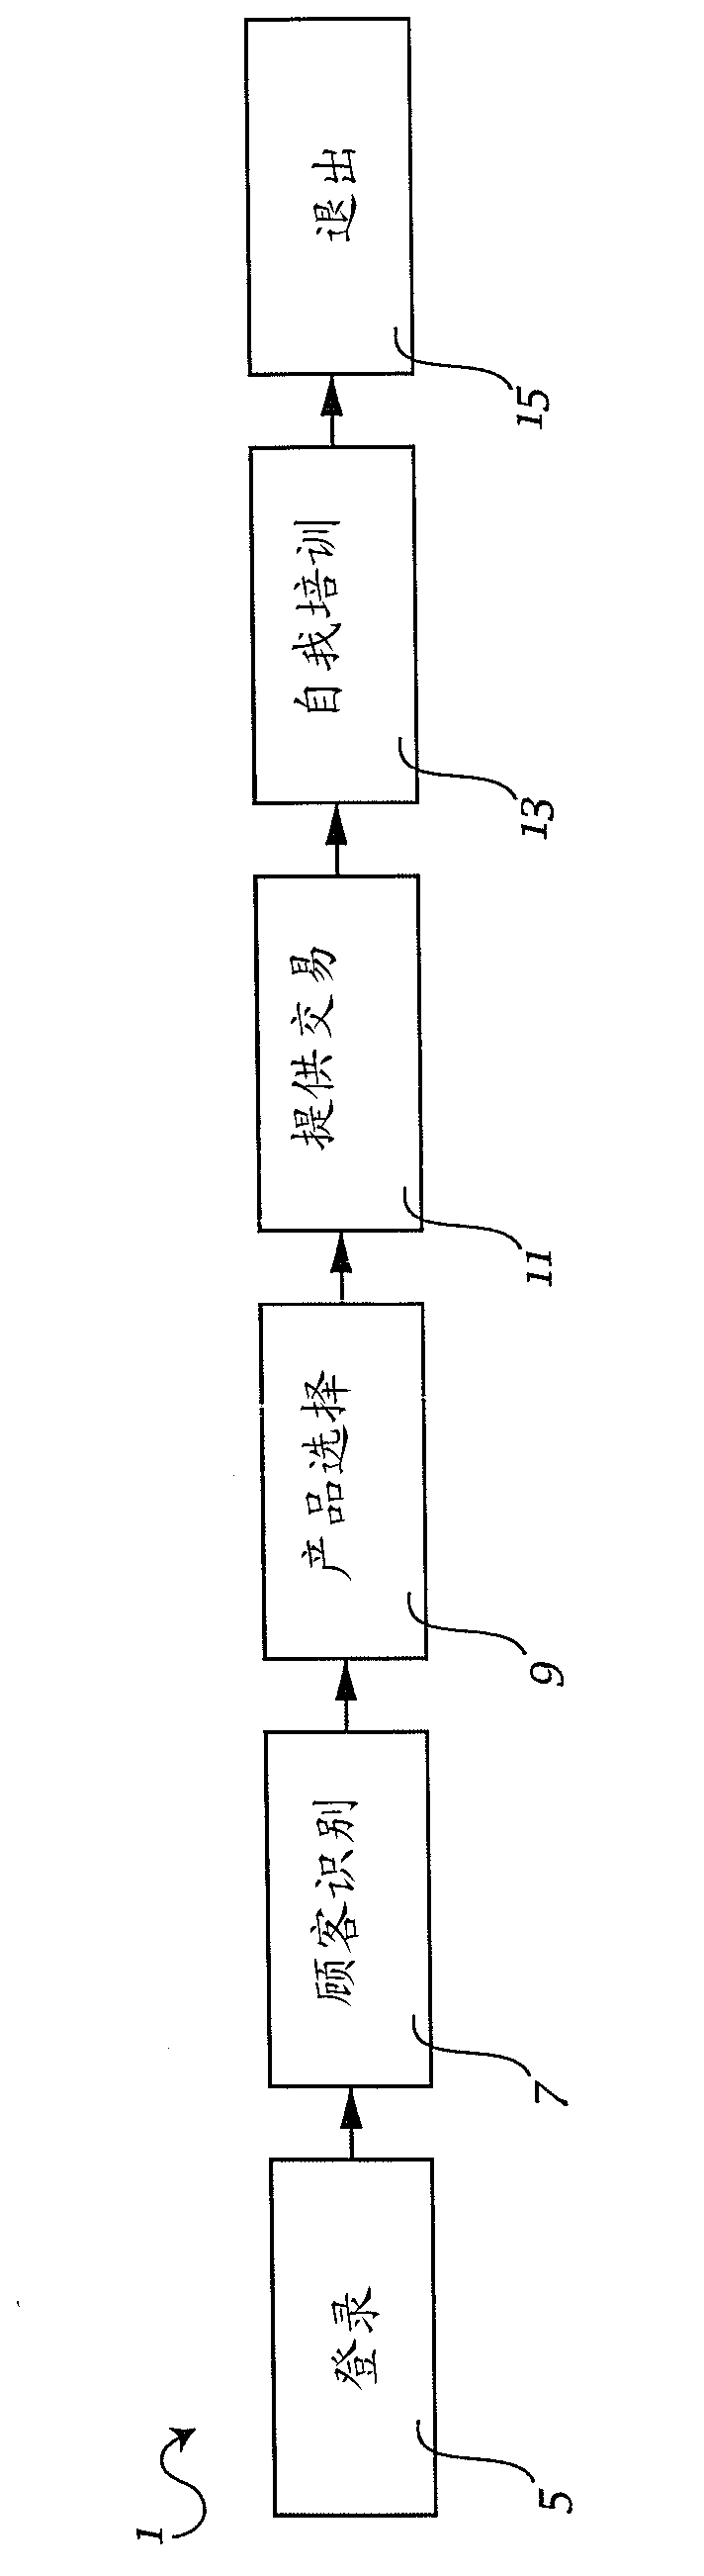 System, method, and apparatus to facilitate commerce and sales